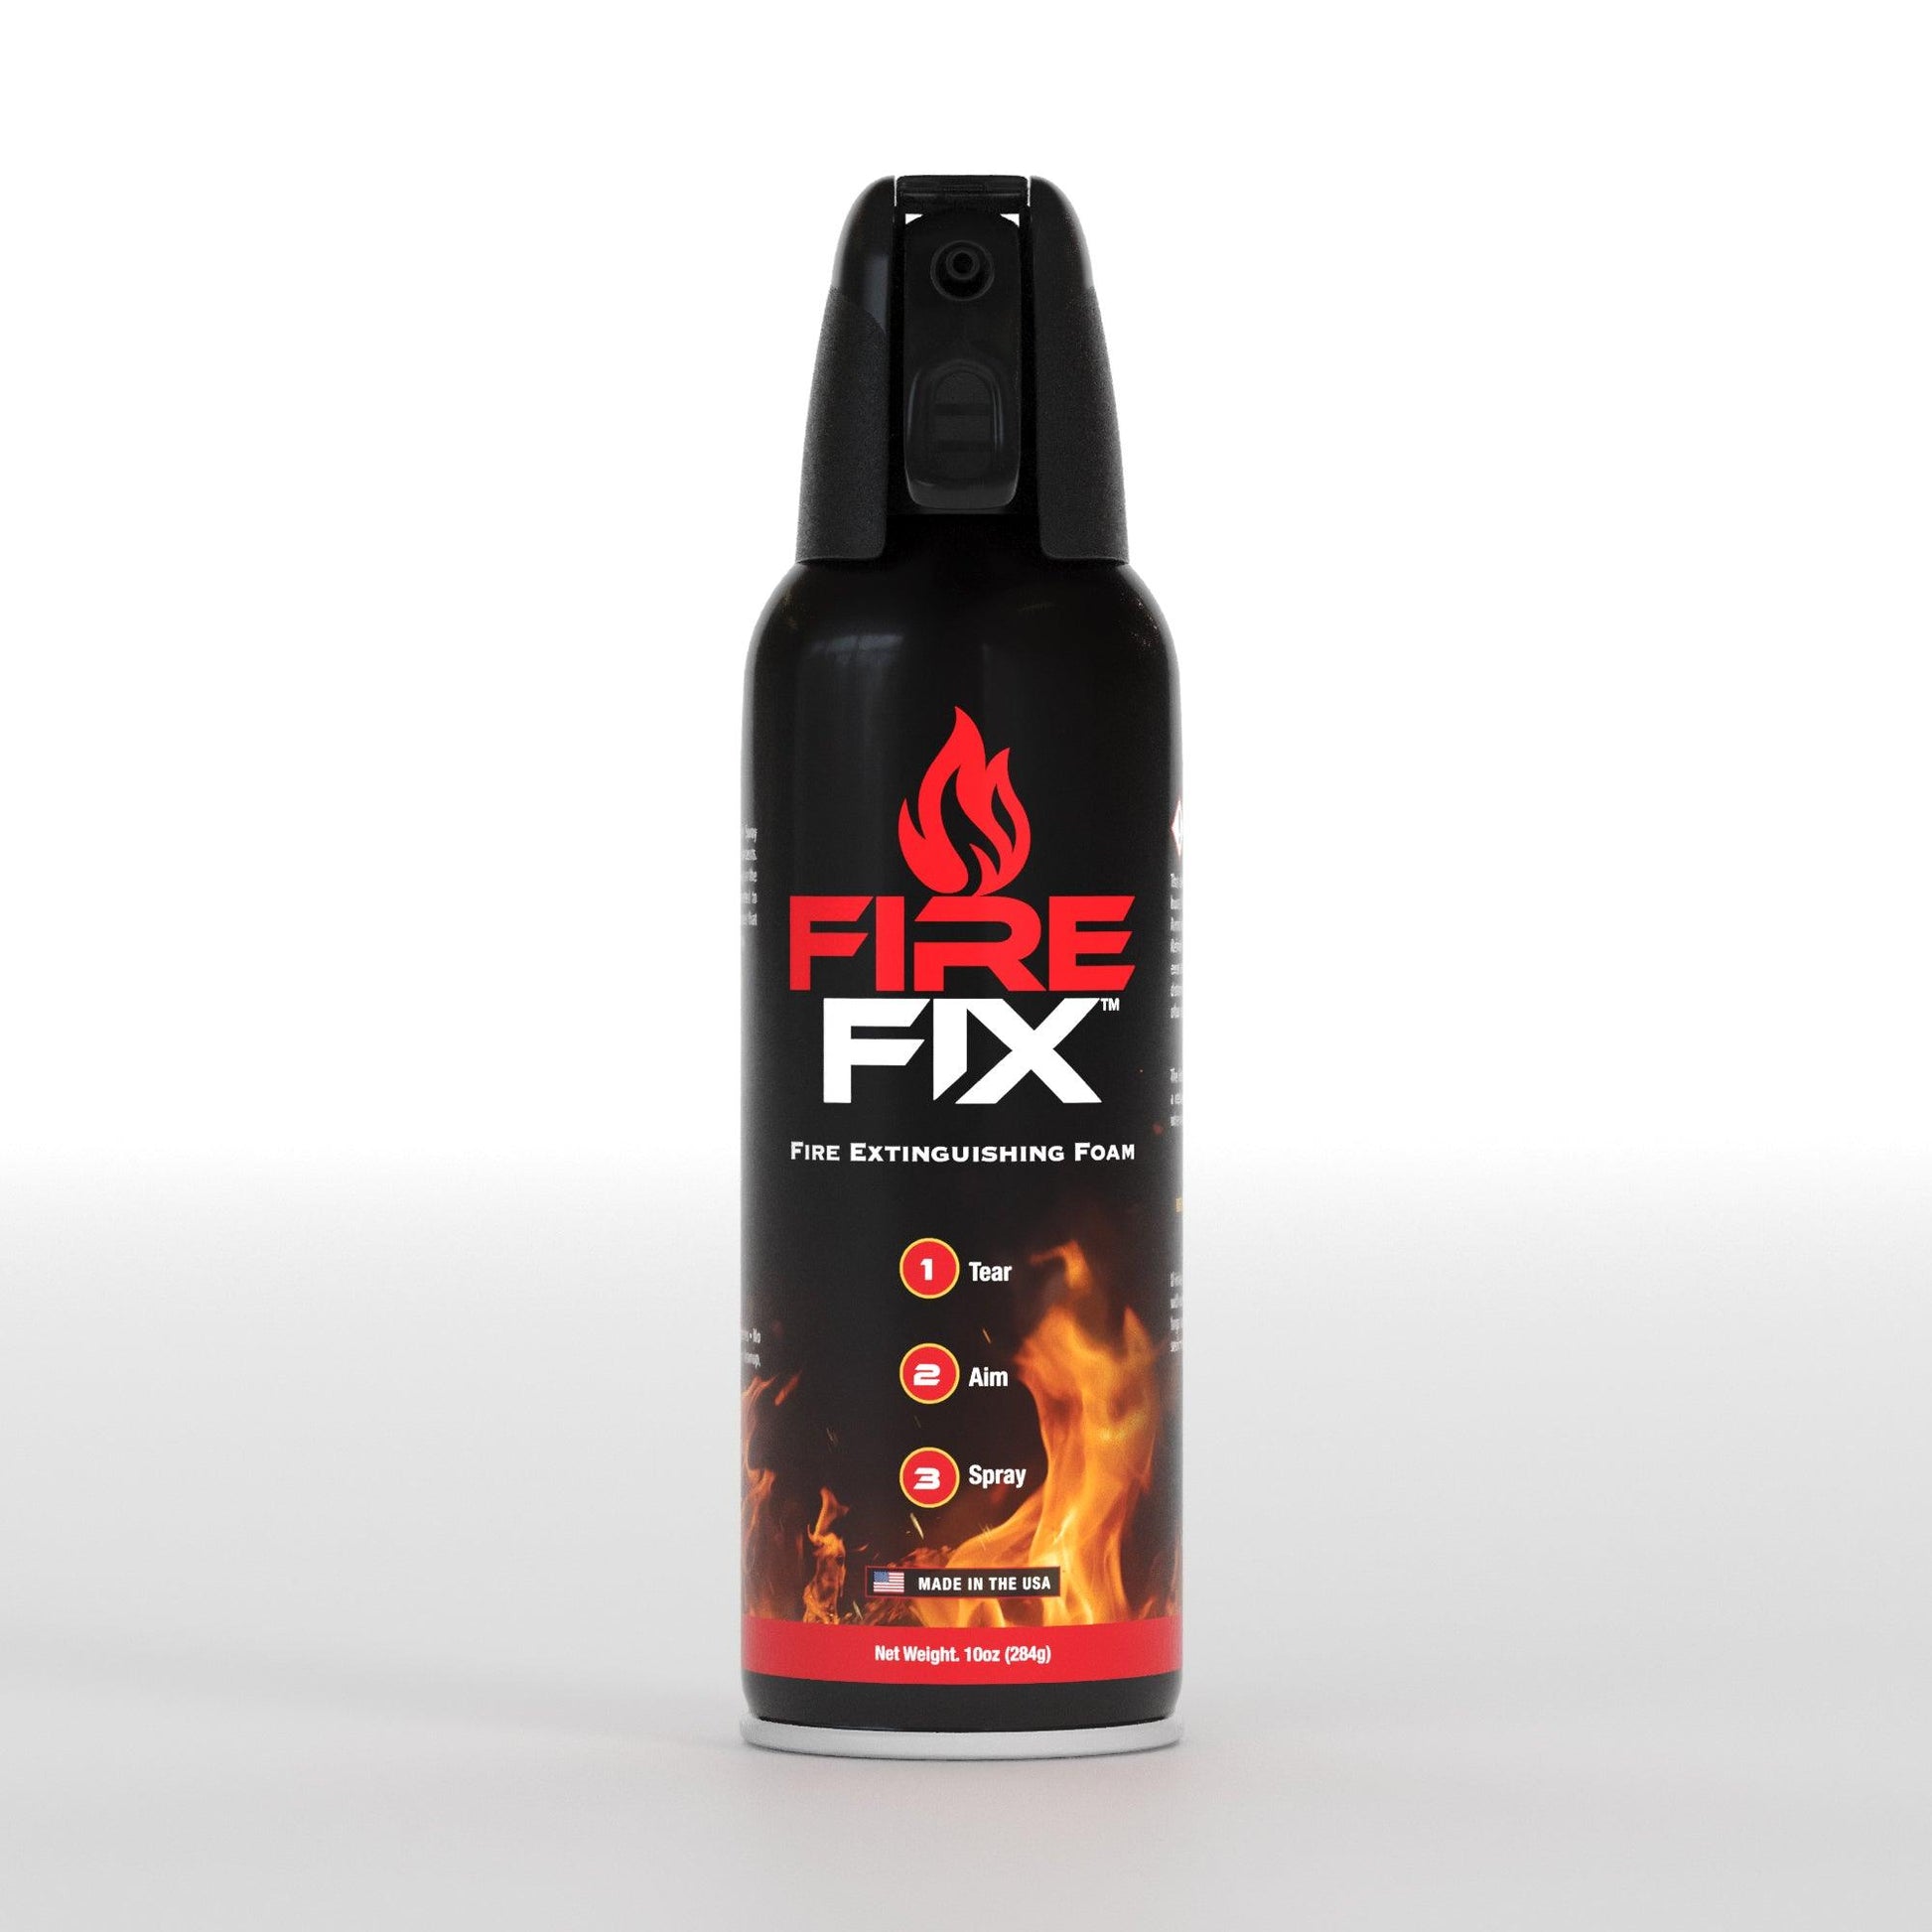 Fire Fix fire extinguishing foam against a white background, emphasizing its simple usage steps and American-made quality for emergency fire situations.